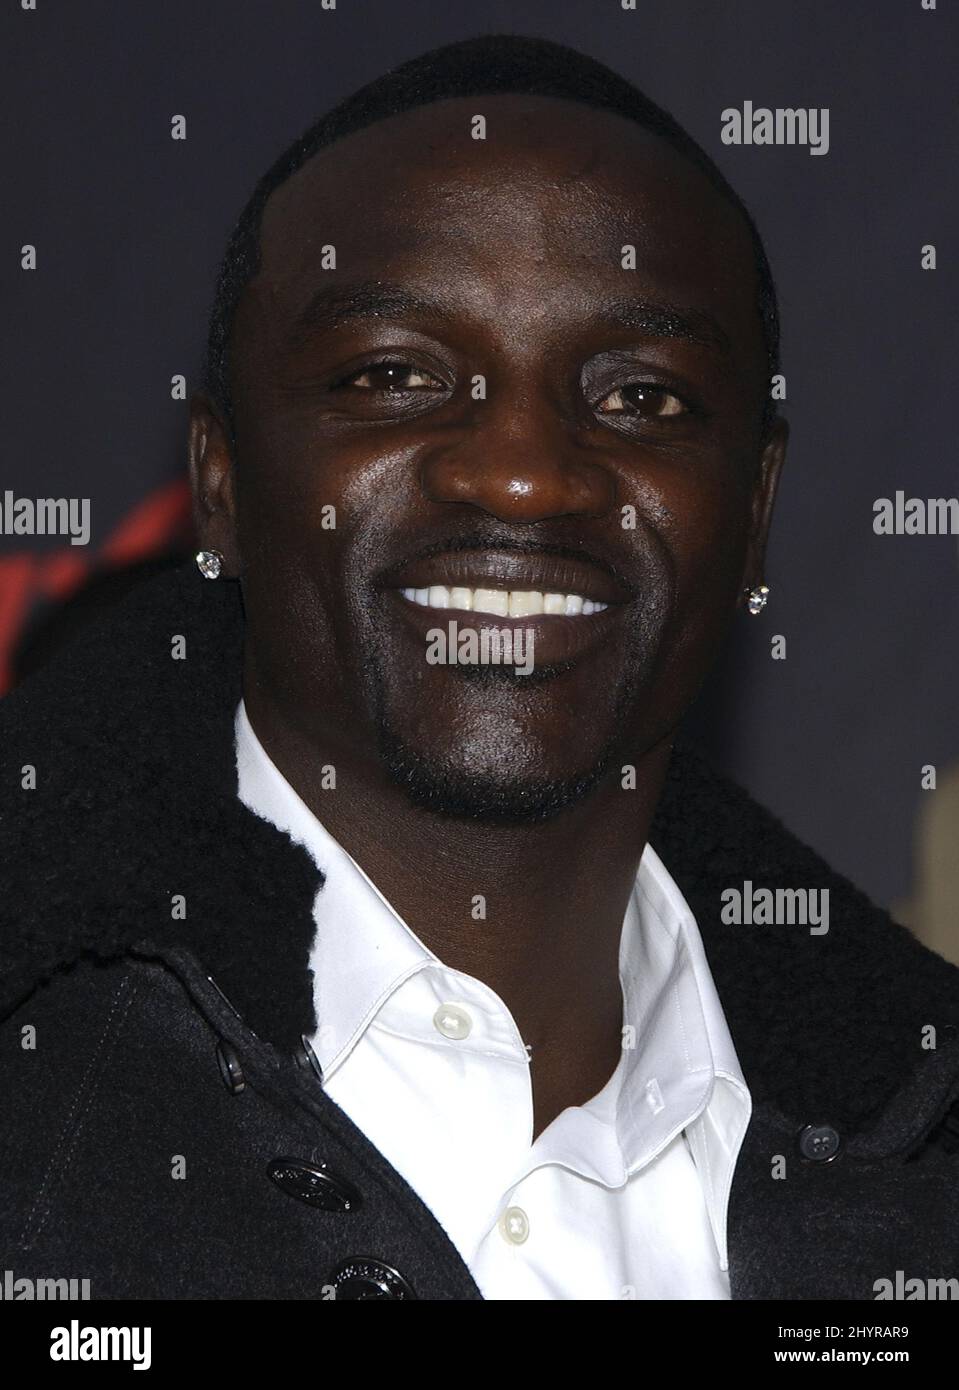 Akon attends the 2007 American Music Awards held at the Nokia Theatre in Los Angeles. Stock Photo